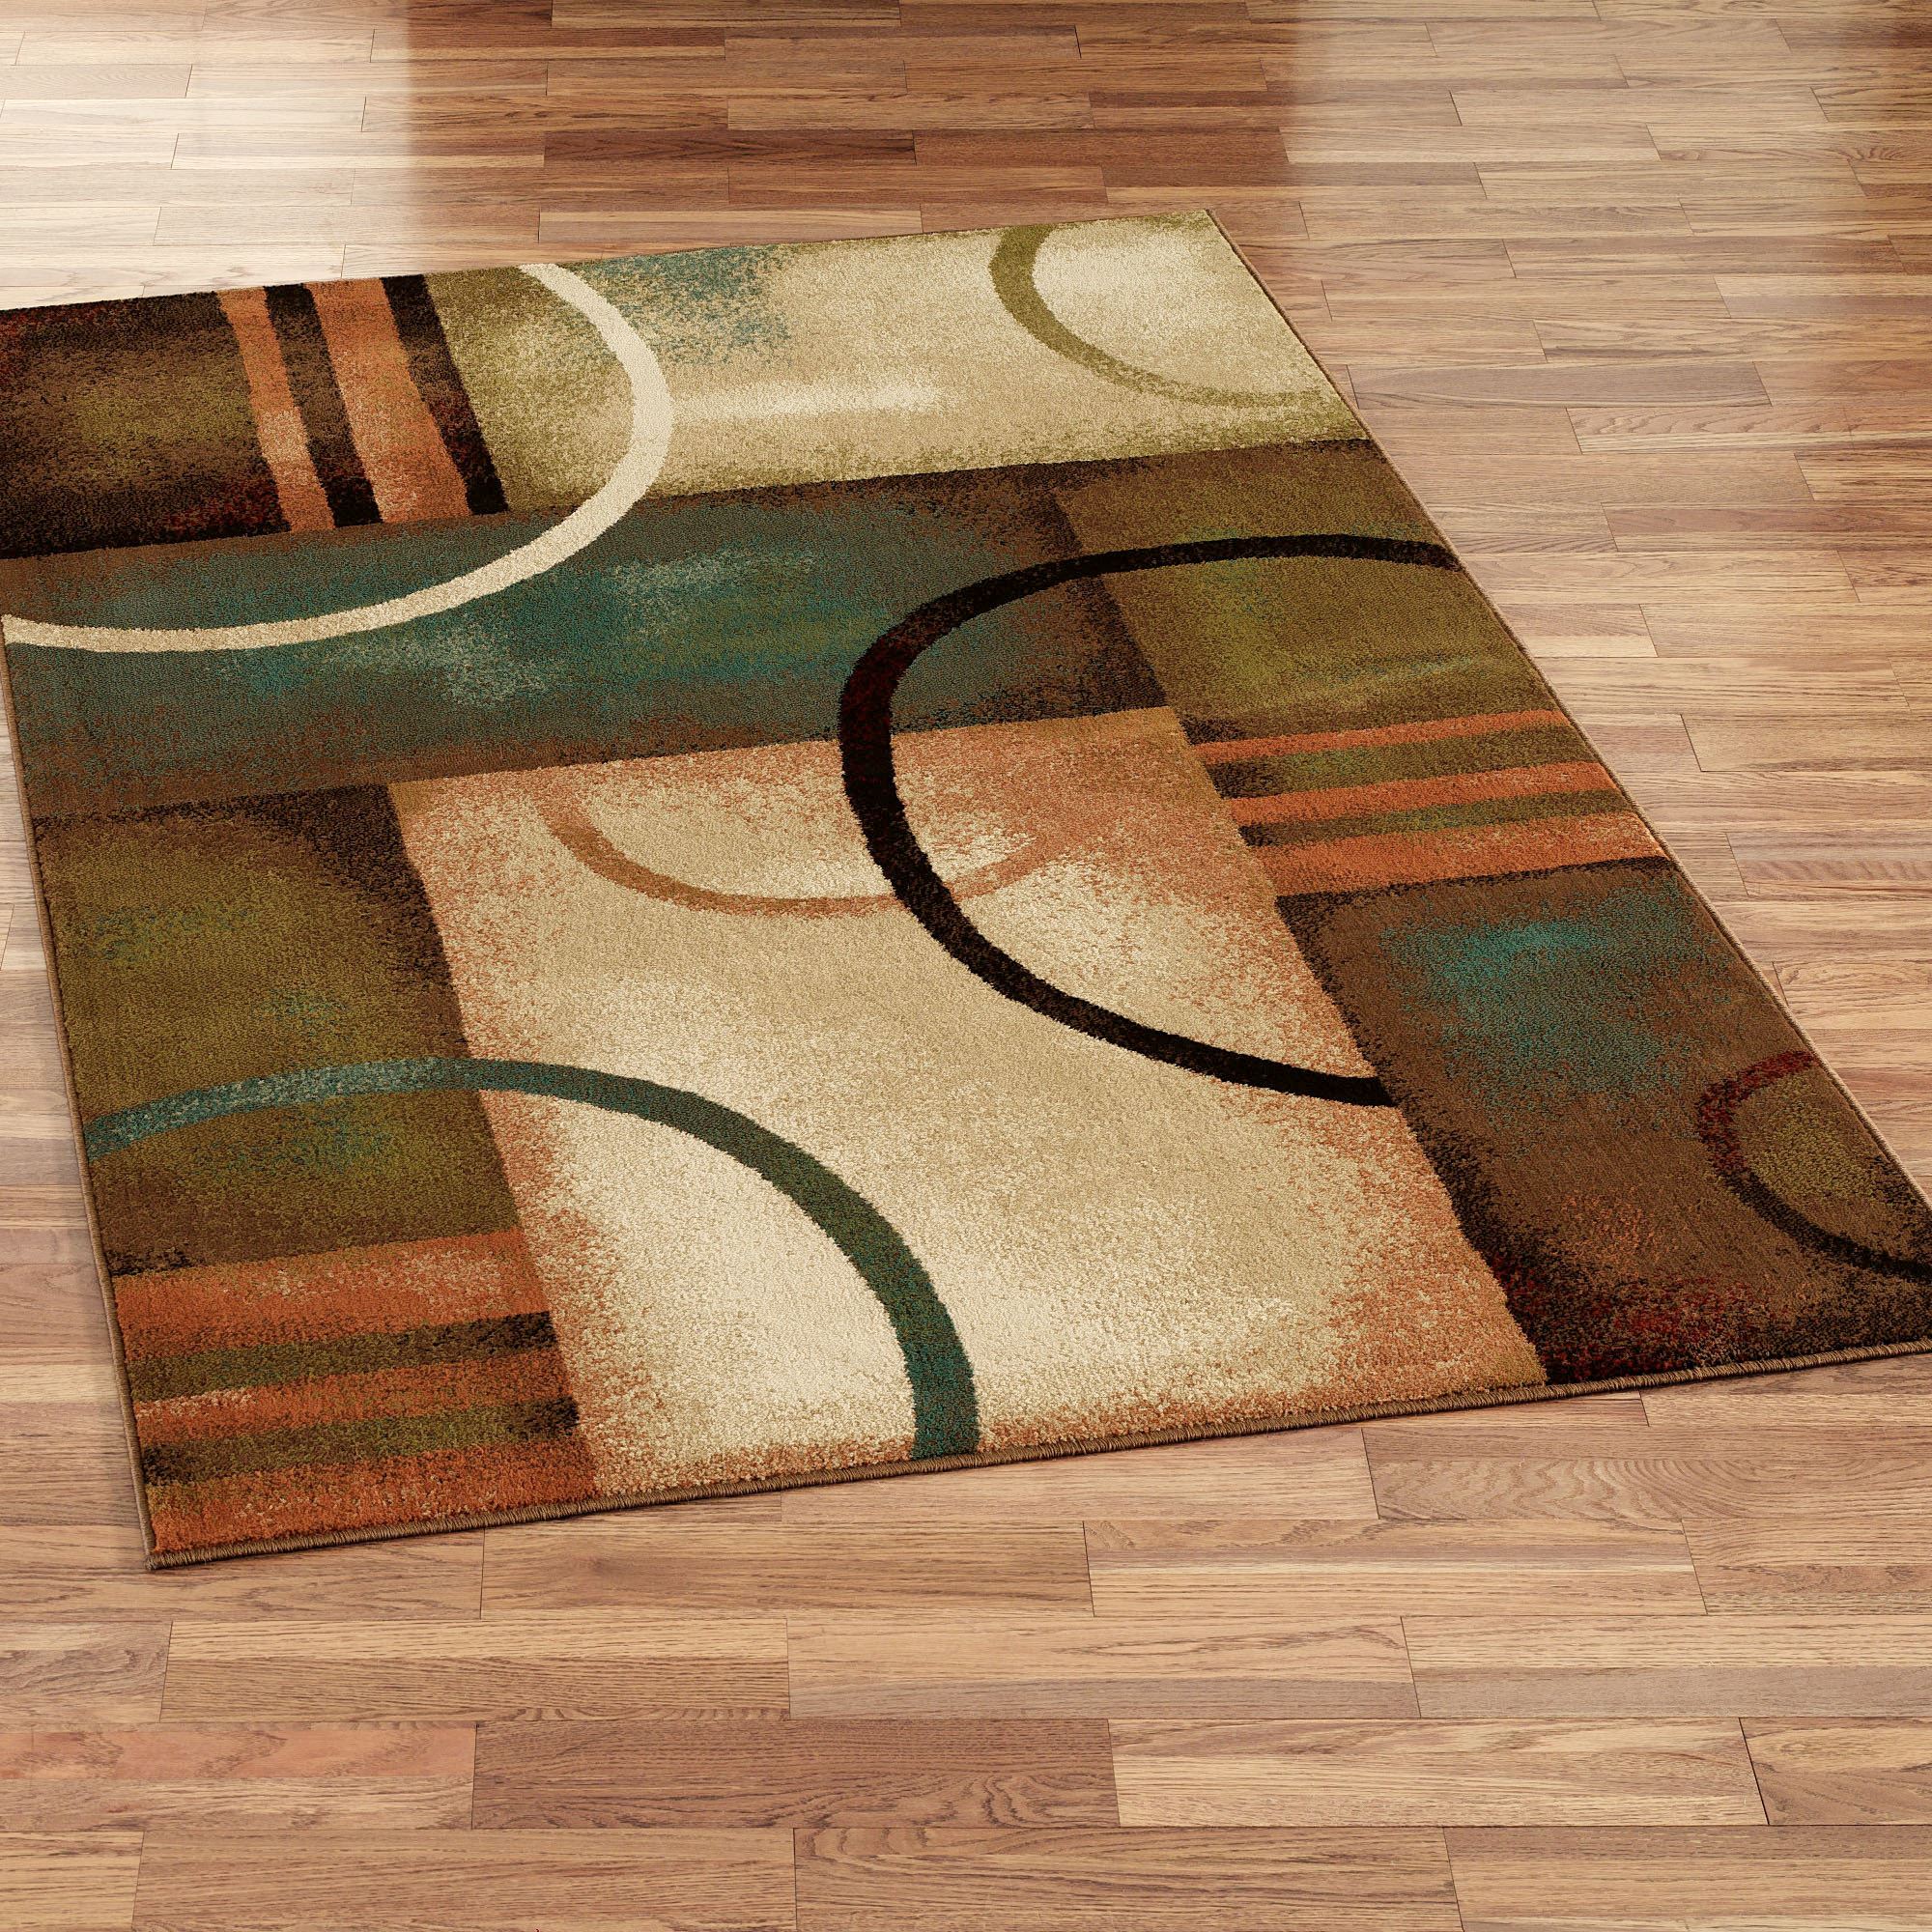 Choosing the contemporary area rugs for your home